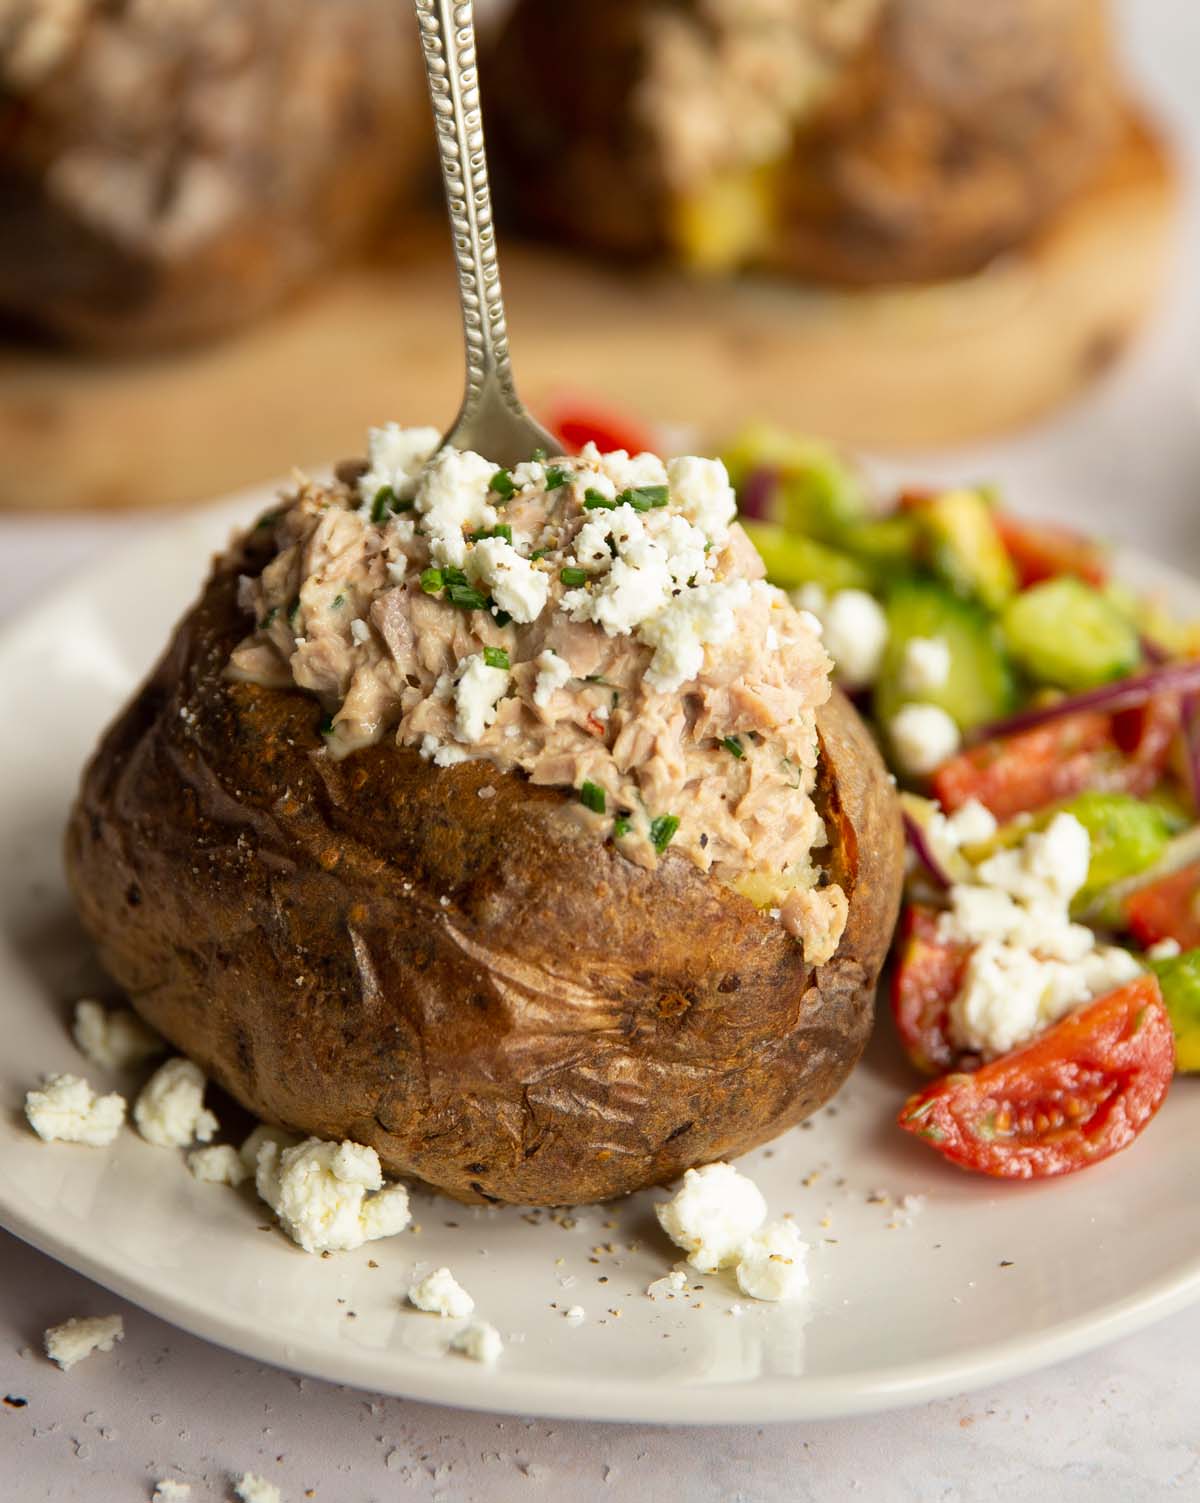 Top 15 baked potato toppings